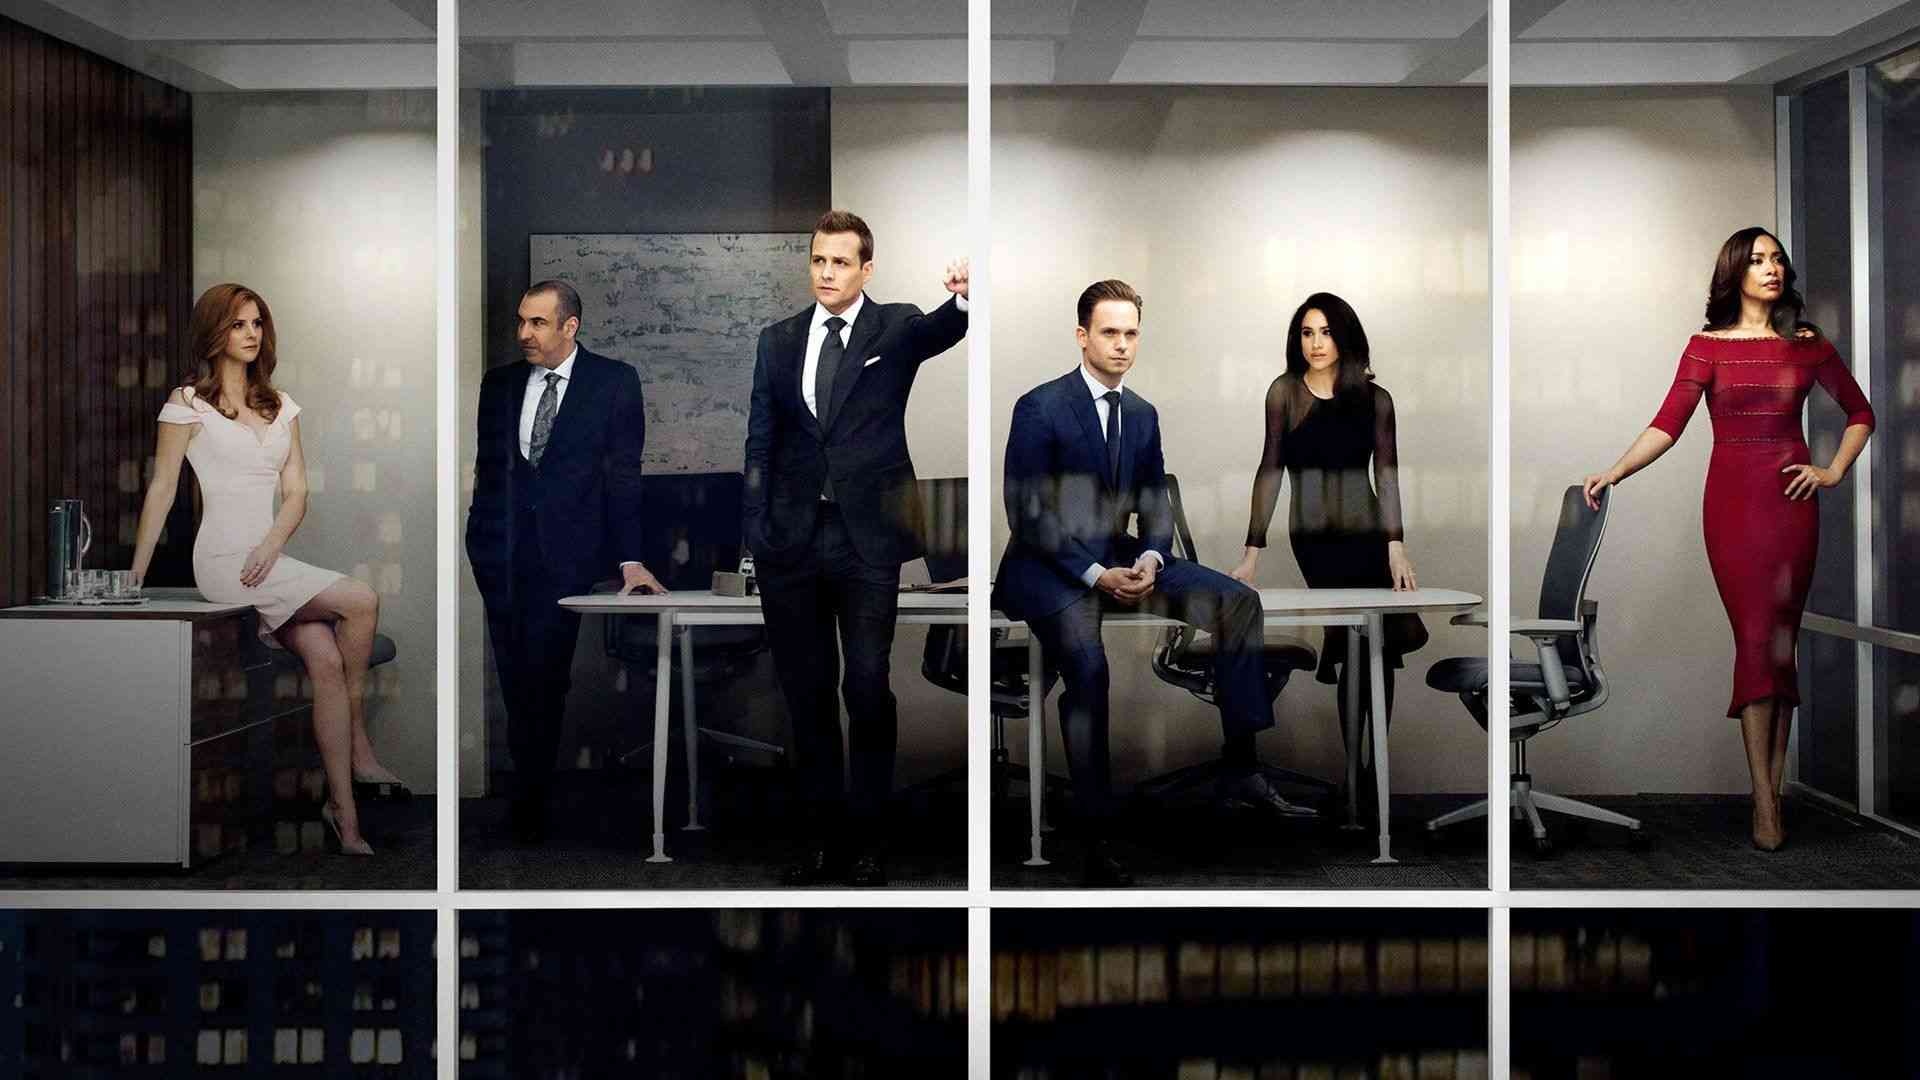 Harvey Specter, Exciting TV shows, Rise and fall, Media disappointment, 1920x1080 Full HD Desktop